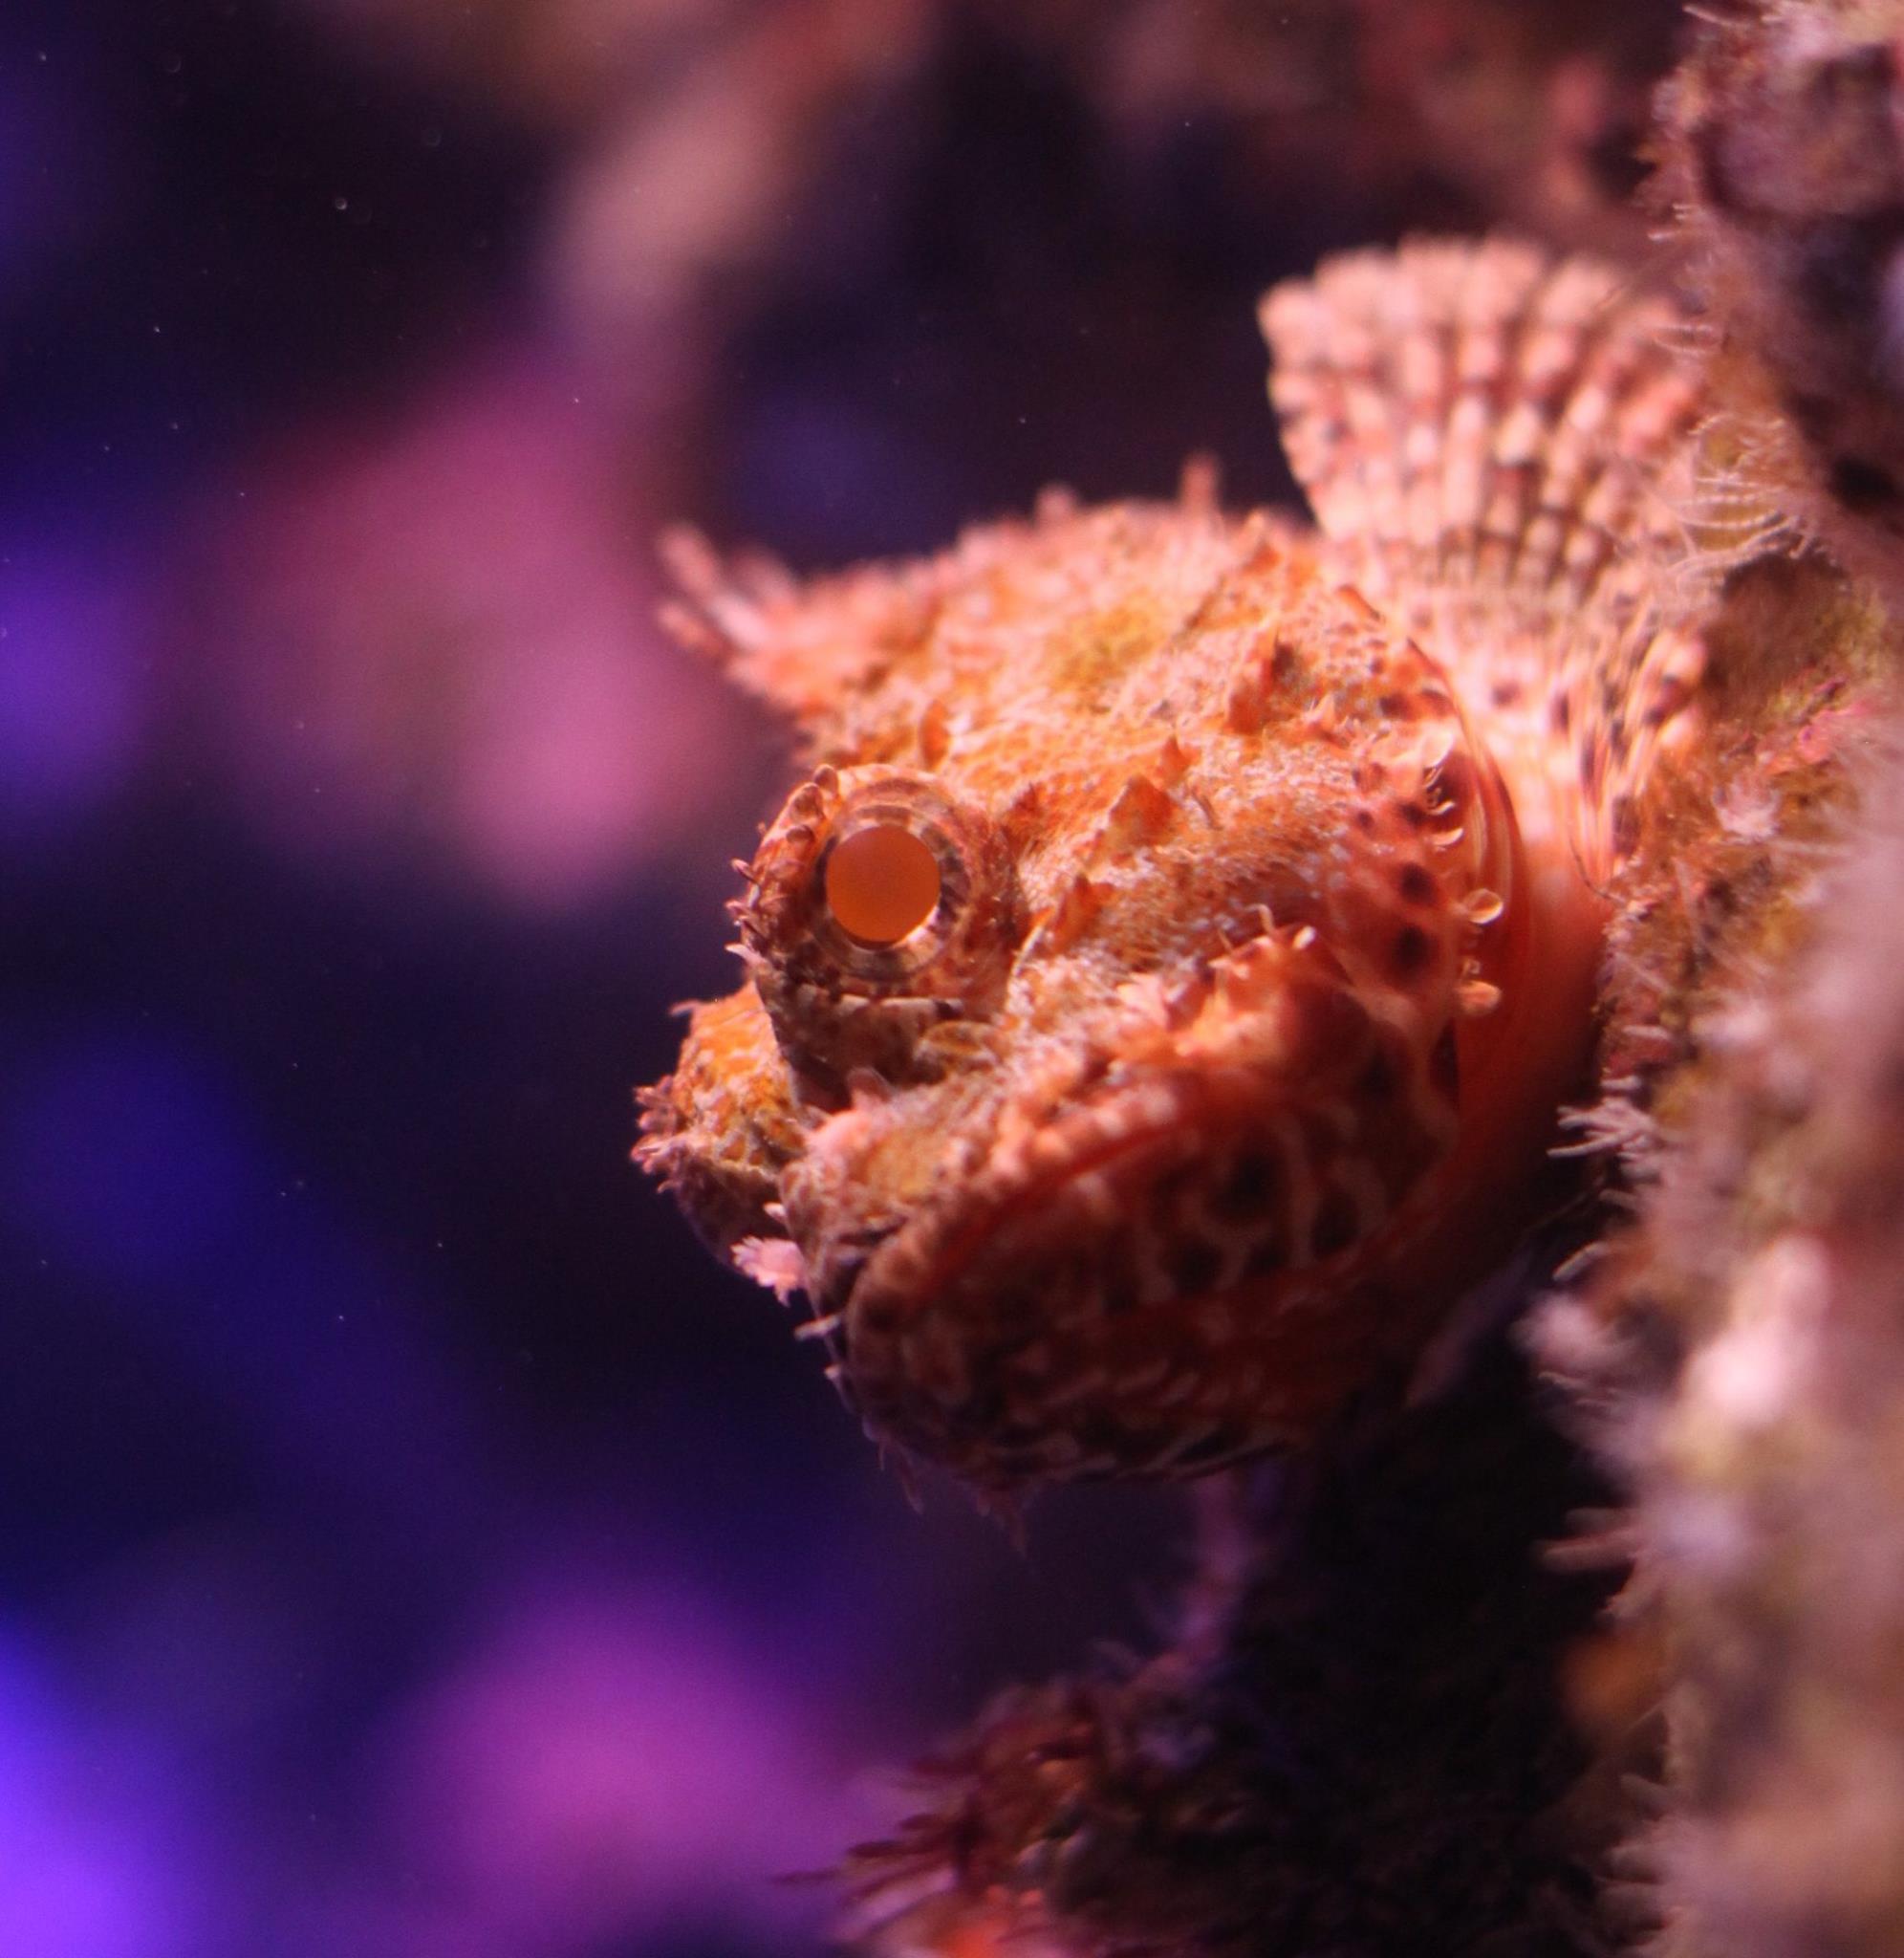 Venomous fish - the Red Rock Cod also known as the Scorpionfish